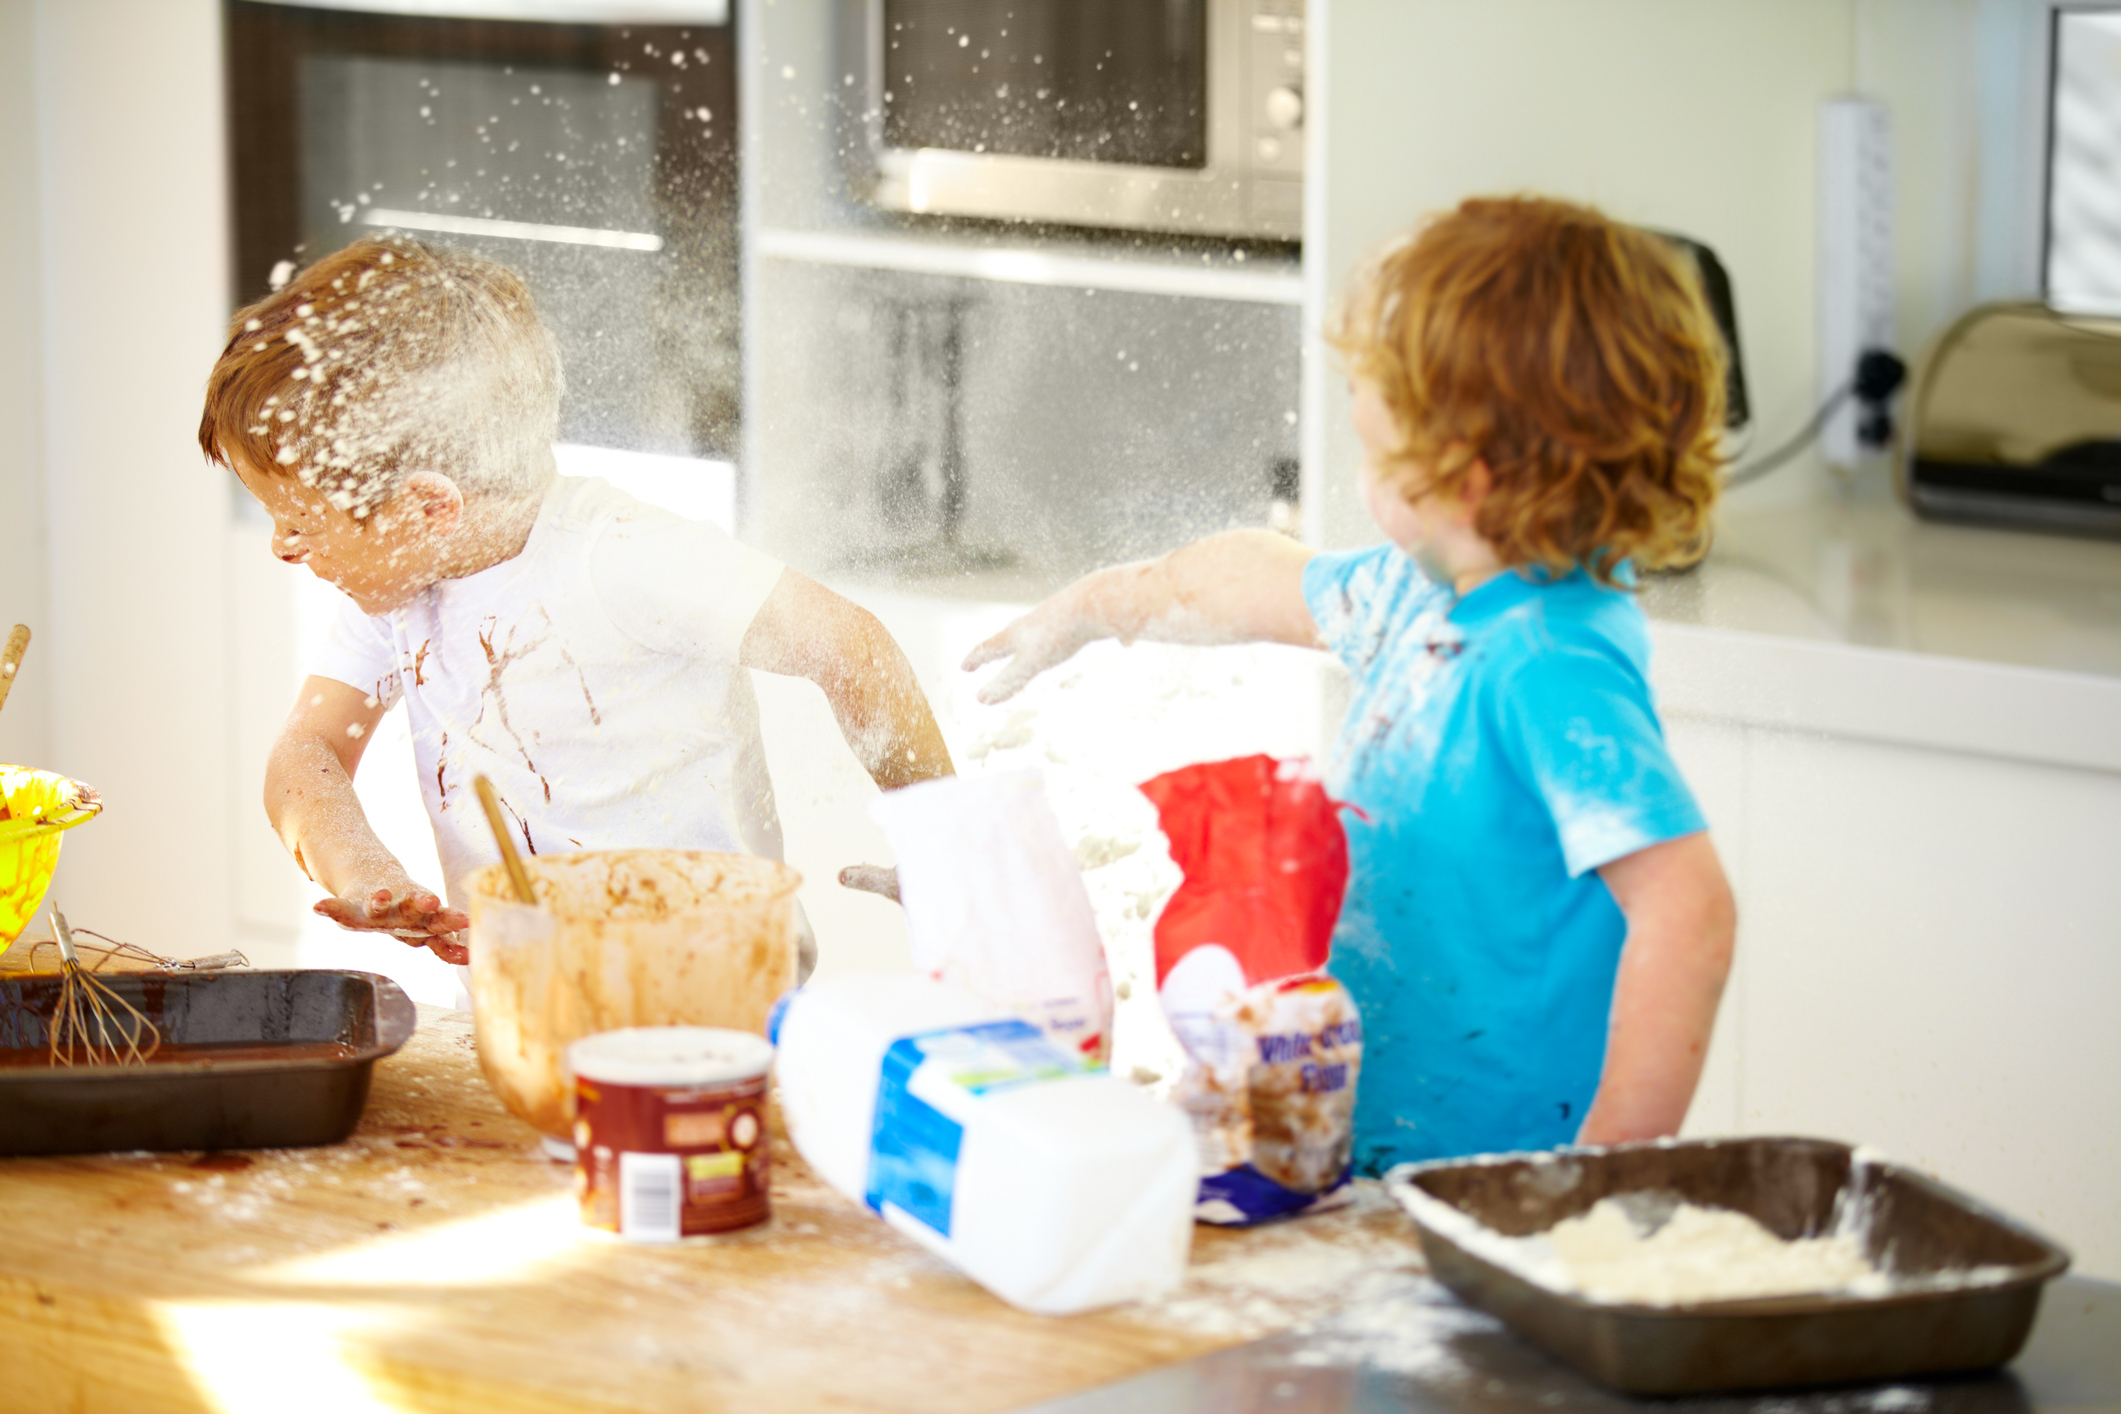 Kid throwing flour at another kid in the kitchen